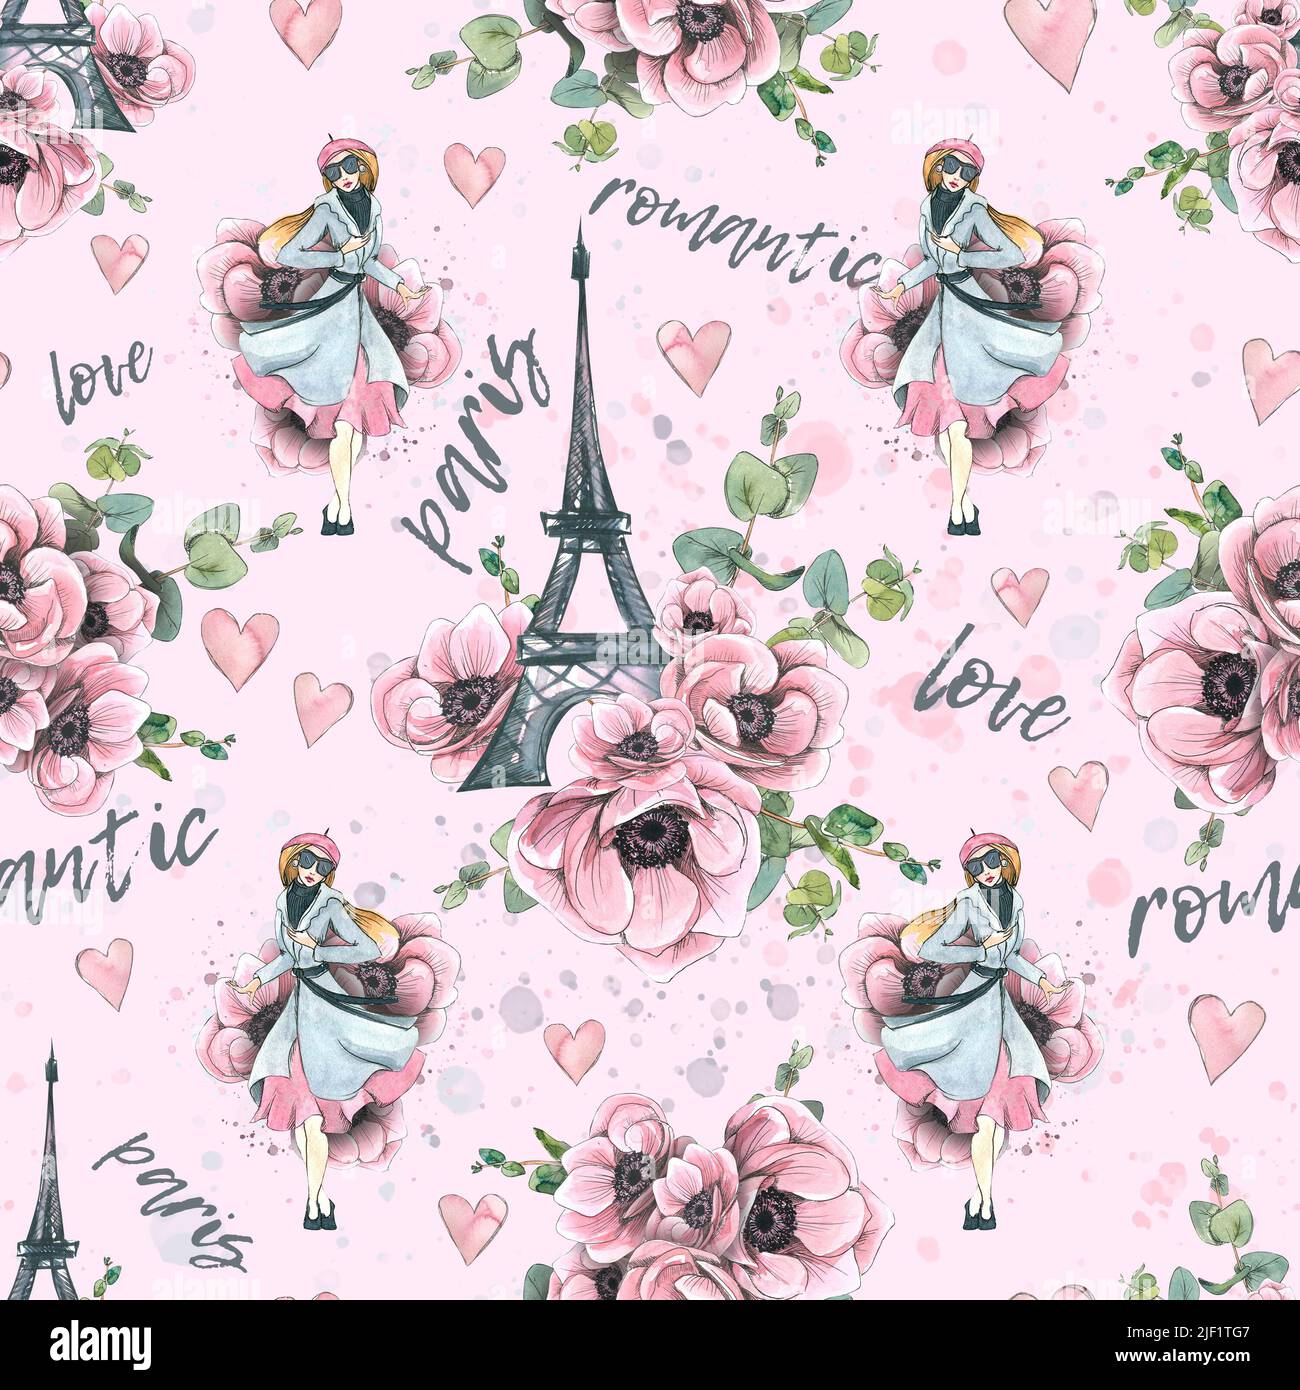 Eiffel Tower with anemone flowers, eucalyptus twigs and Parisian. Watercolor illustration in sketch style with graphic elements. Seamless pattern from Stock Photo